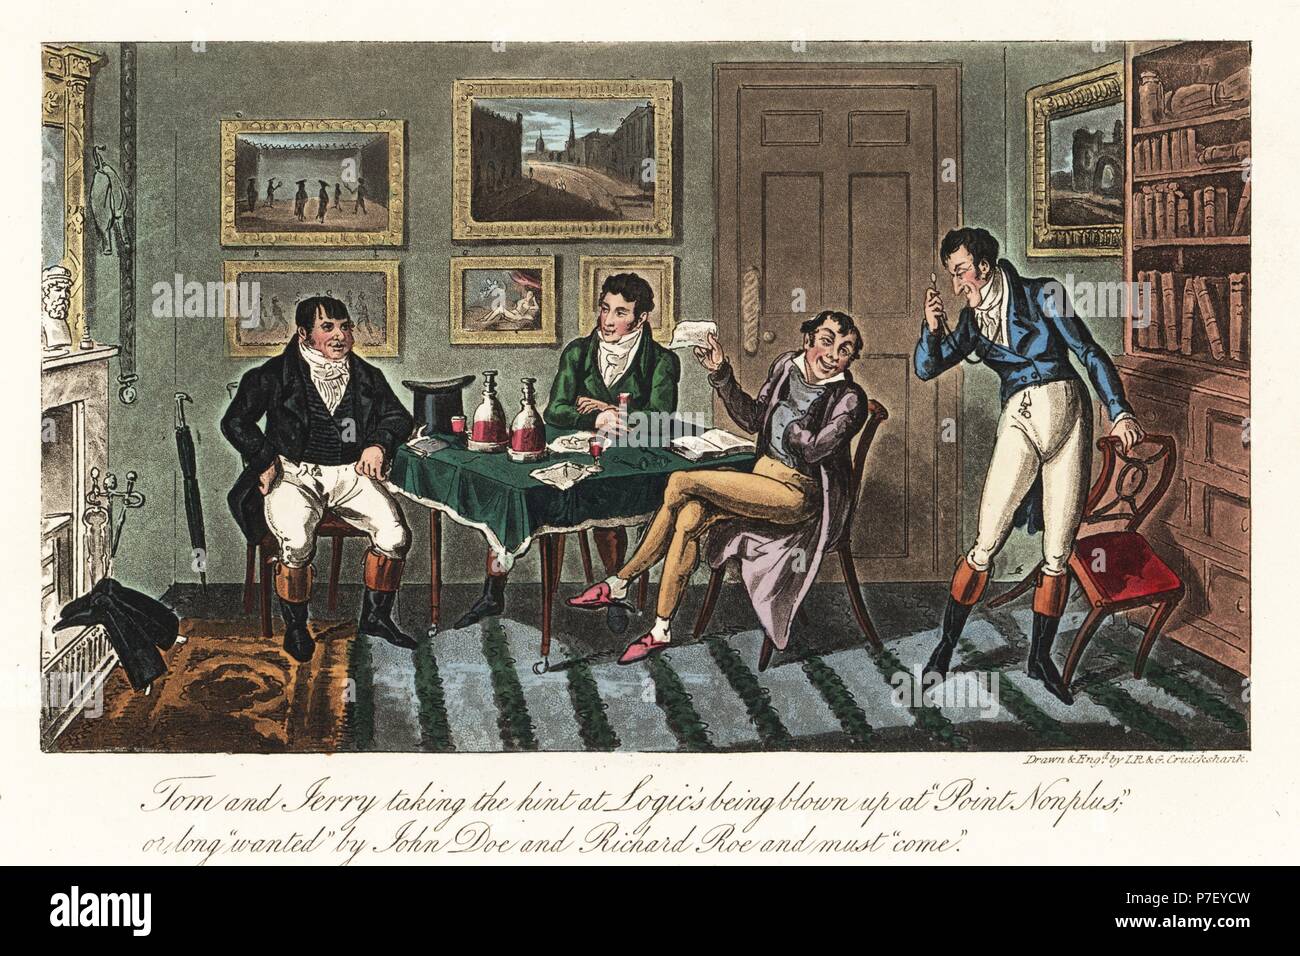 English dandies at the home of a bankrupt friend as he is evicted for debt. Tom and Jerry taking the hint at Logic's beling blown up at Point Nonplus or long wanted by John Doe and Richard Roe and must come. Handcoloured copperplate engraving by Isaac Robert Cruikshank and George Cruikshank from Pierce Egan's Life in London, Sherwood, Jones, London, 1823. Stock Photo